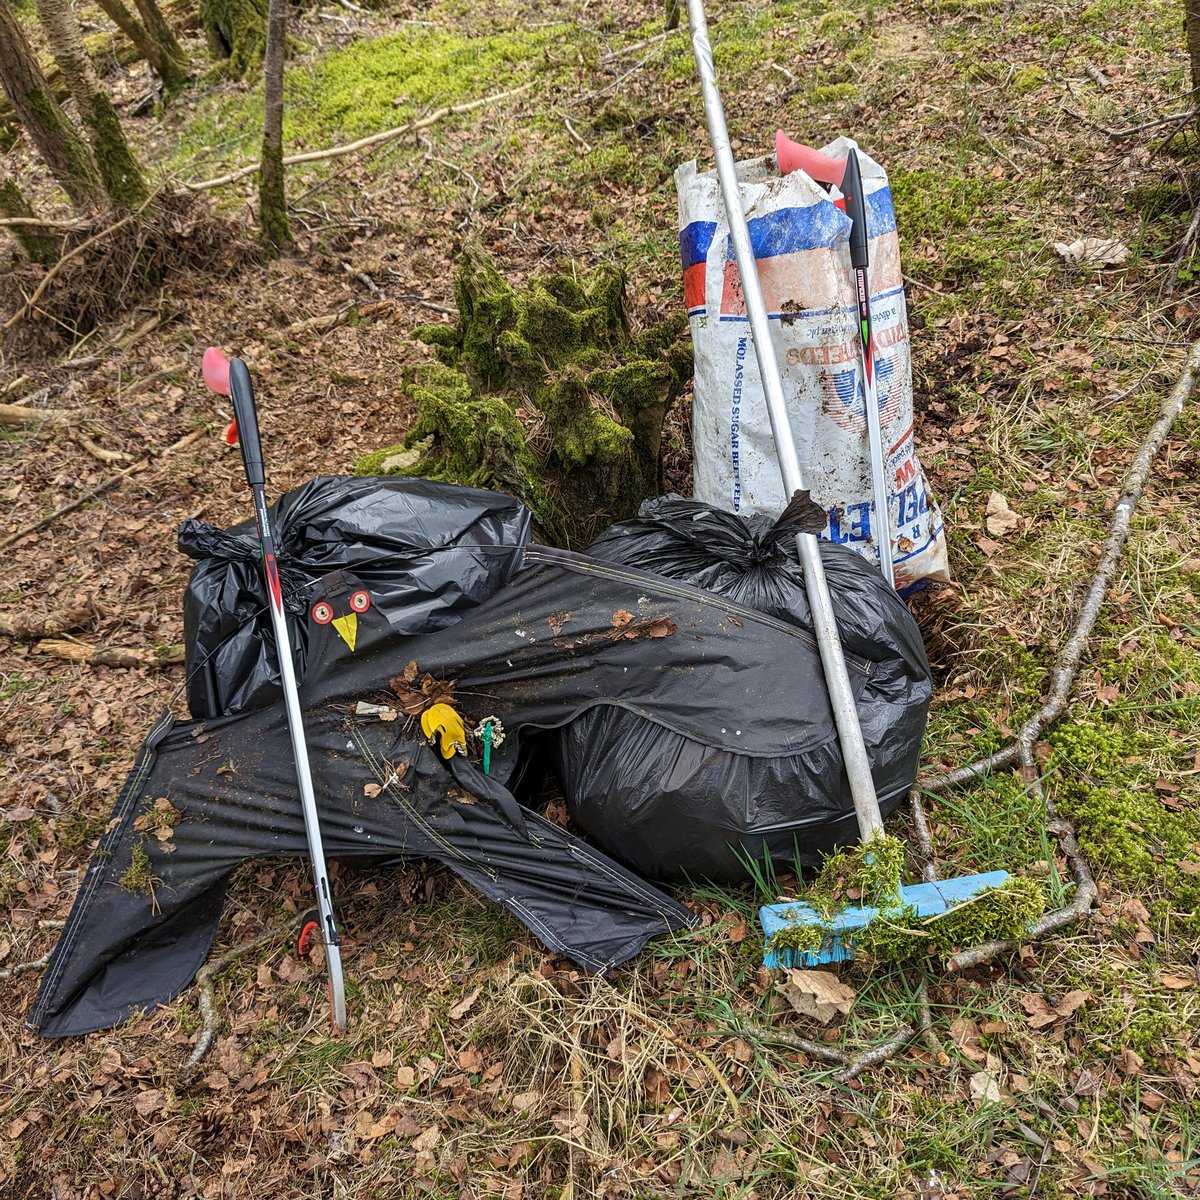 🗑️🚮Litter Pick🚮🗑️
Me and my partner joined our local community to help clean up a section of our local woods 🗑️🌲🌲🌲
#gonesustainable #sustainable #litterpick #litter #zerowaste #cleanup #cleanupcrew #litterclean #woods #wastefree #nature #wildlife #saveourwildlife #ecolife